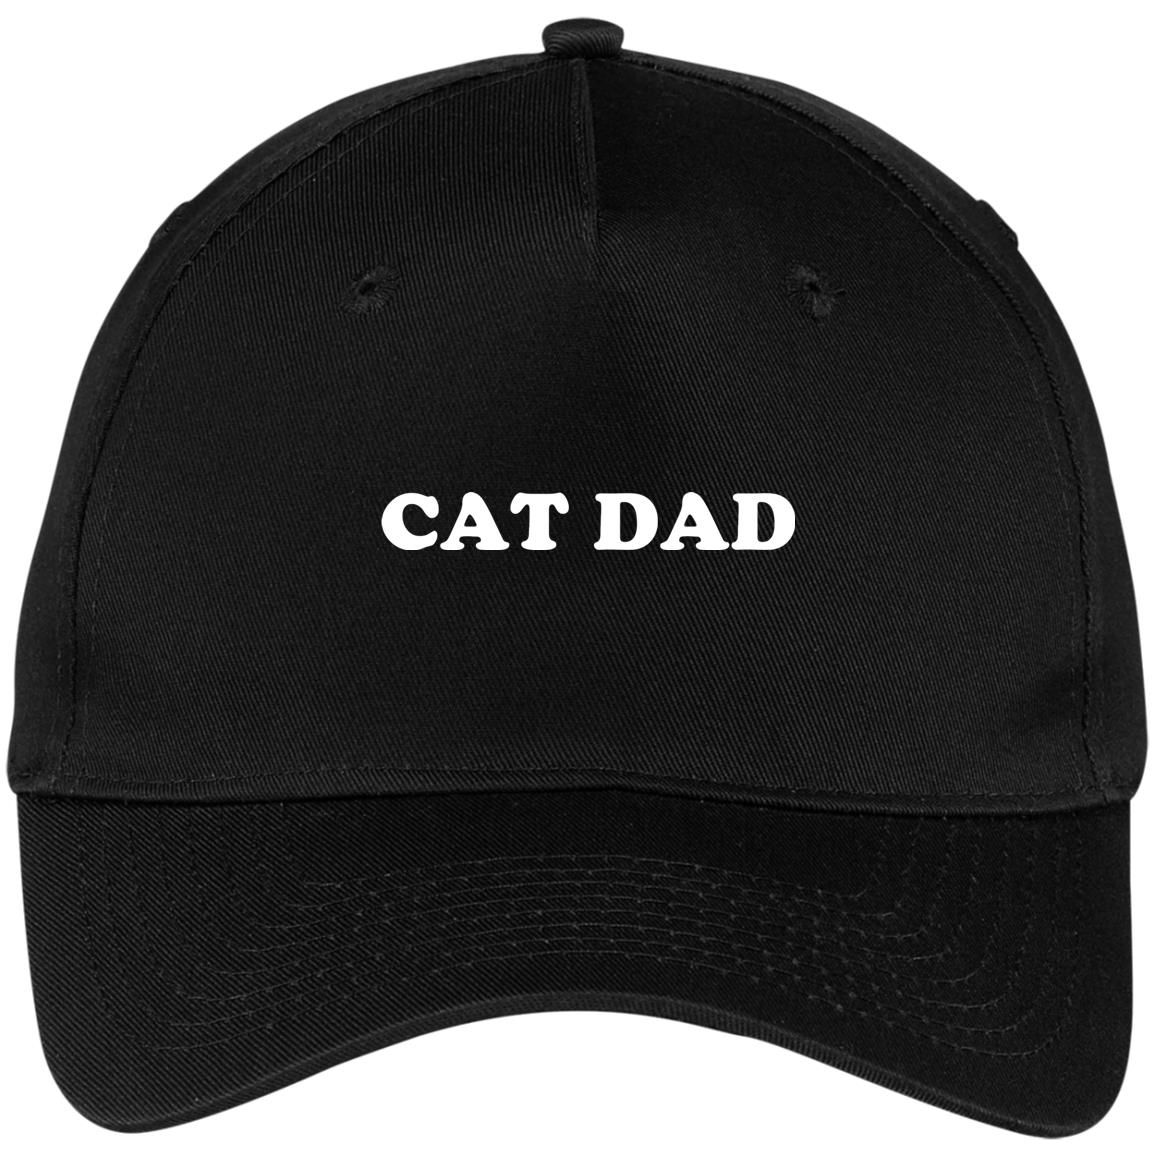 Cat Dad Embroidered Hat Style: CP86 Five Panel Twill Cap, Color: Black